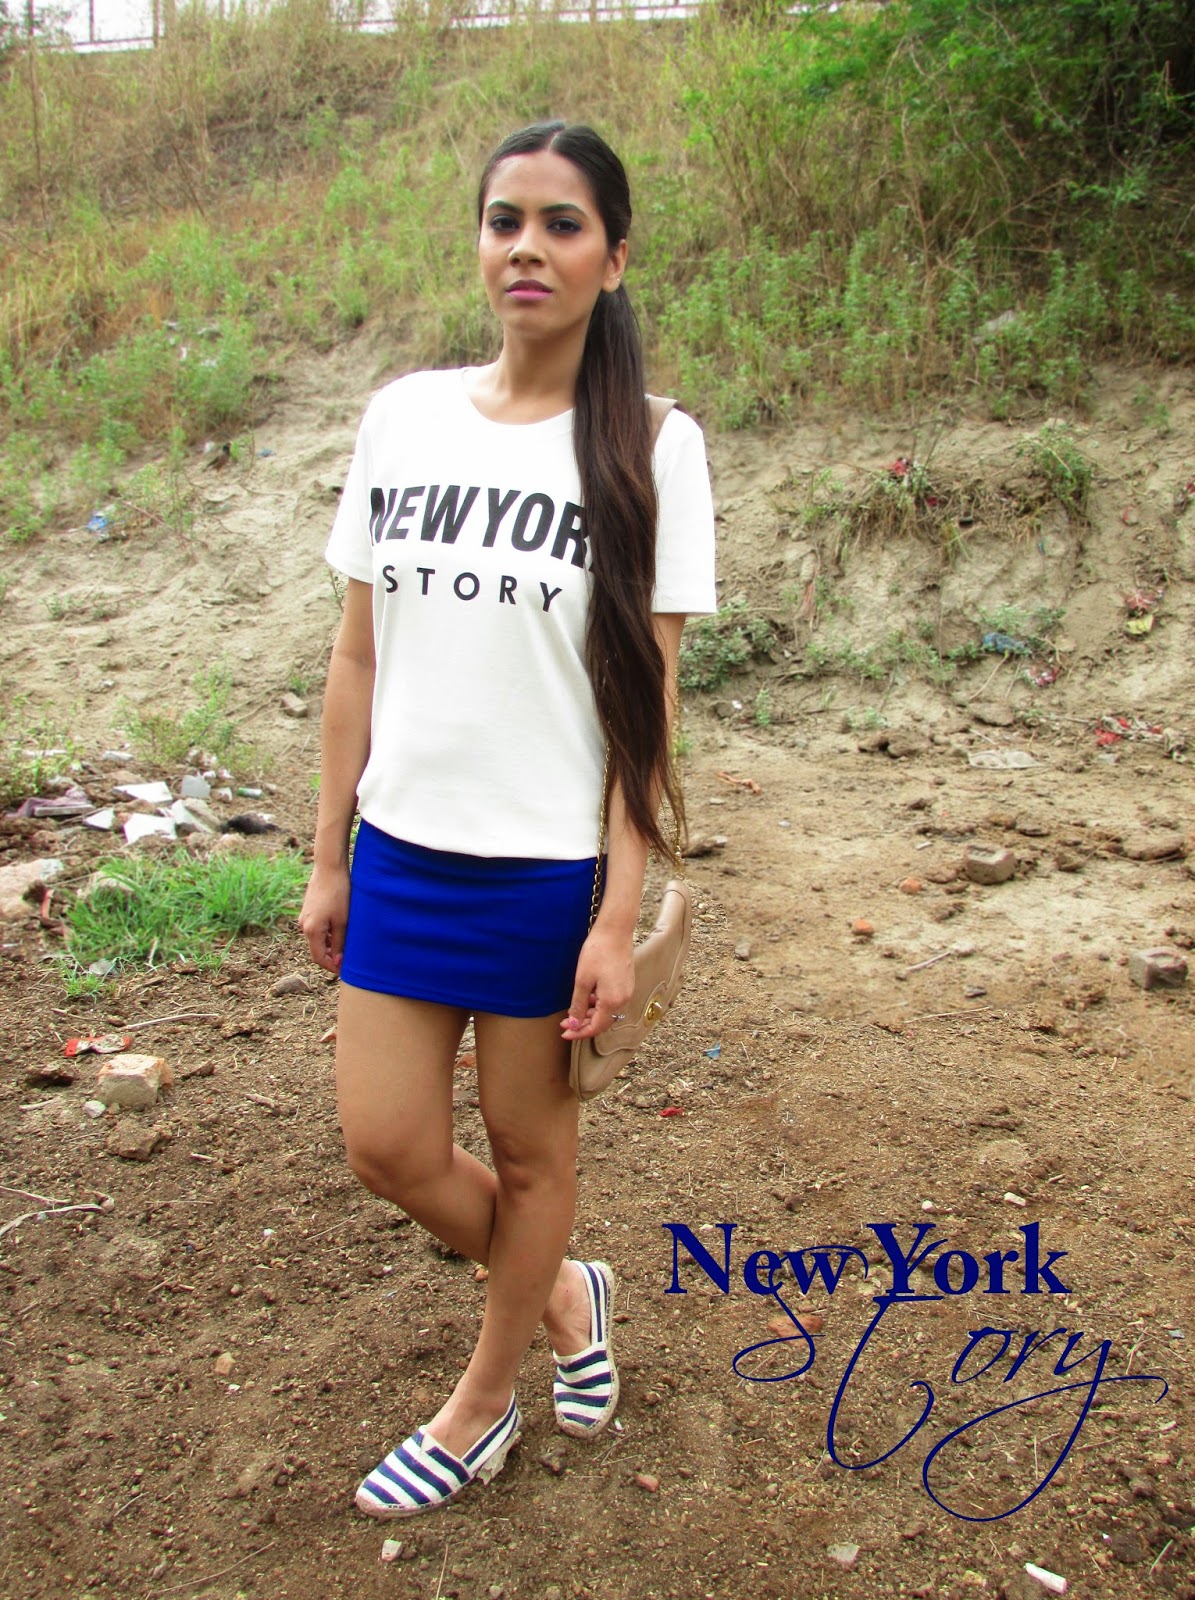 NY , New york tee, new York top , New york print top , New york print tshirt , NY slogan tee shirt , slagan tshirt, NY tee, new york stork tee, new york tee romwe,Sunglasses are a must have in summers and I got vintage round sunglasses. Round sunglasses look perfect on any face shape